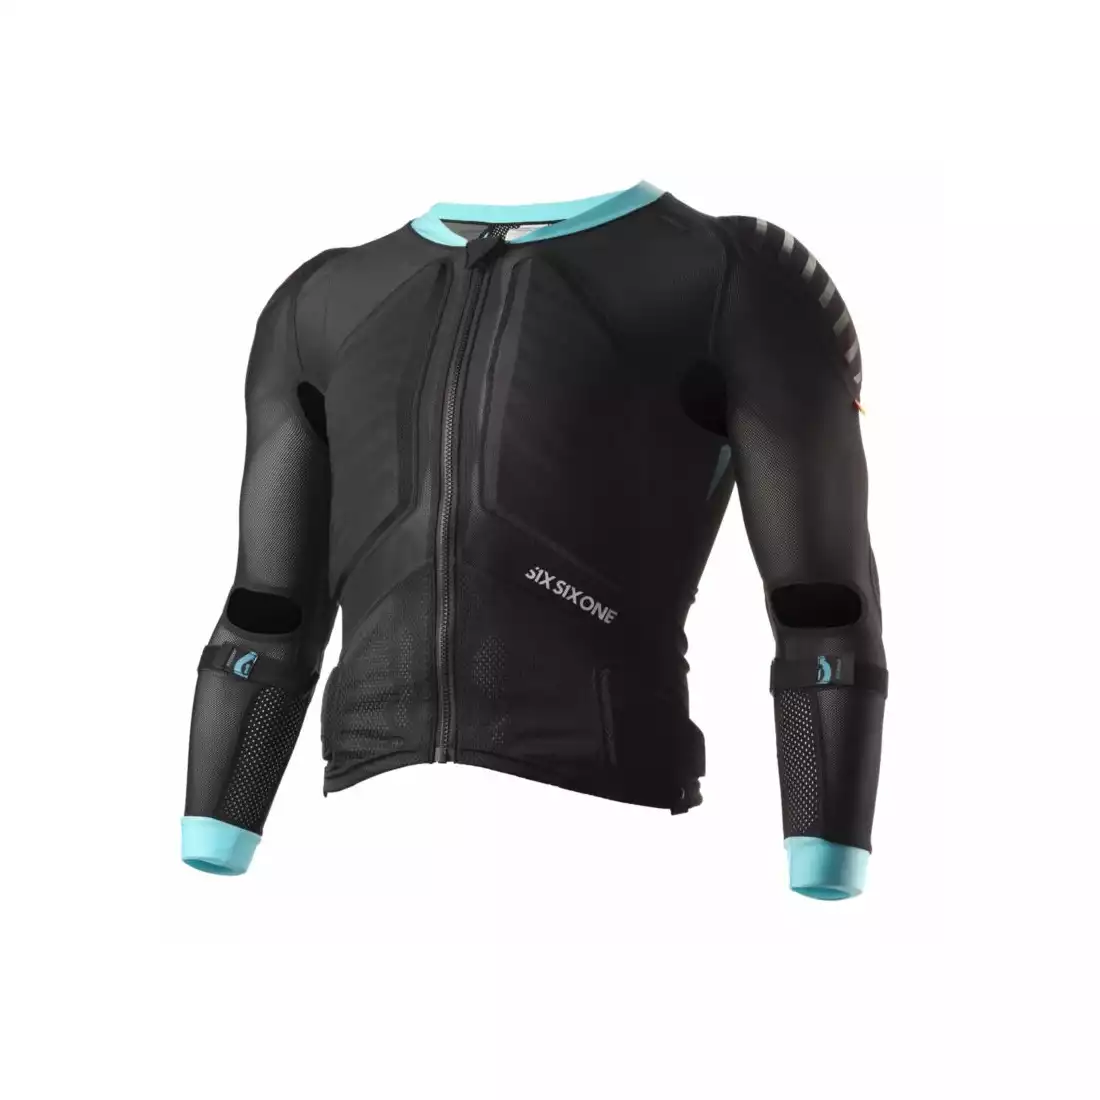 661 EVO COMPRESSION WOMENS Body protector / armor, black / turquoise